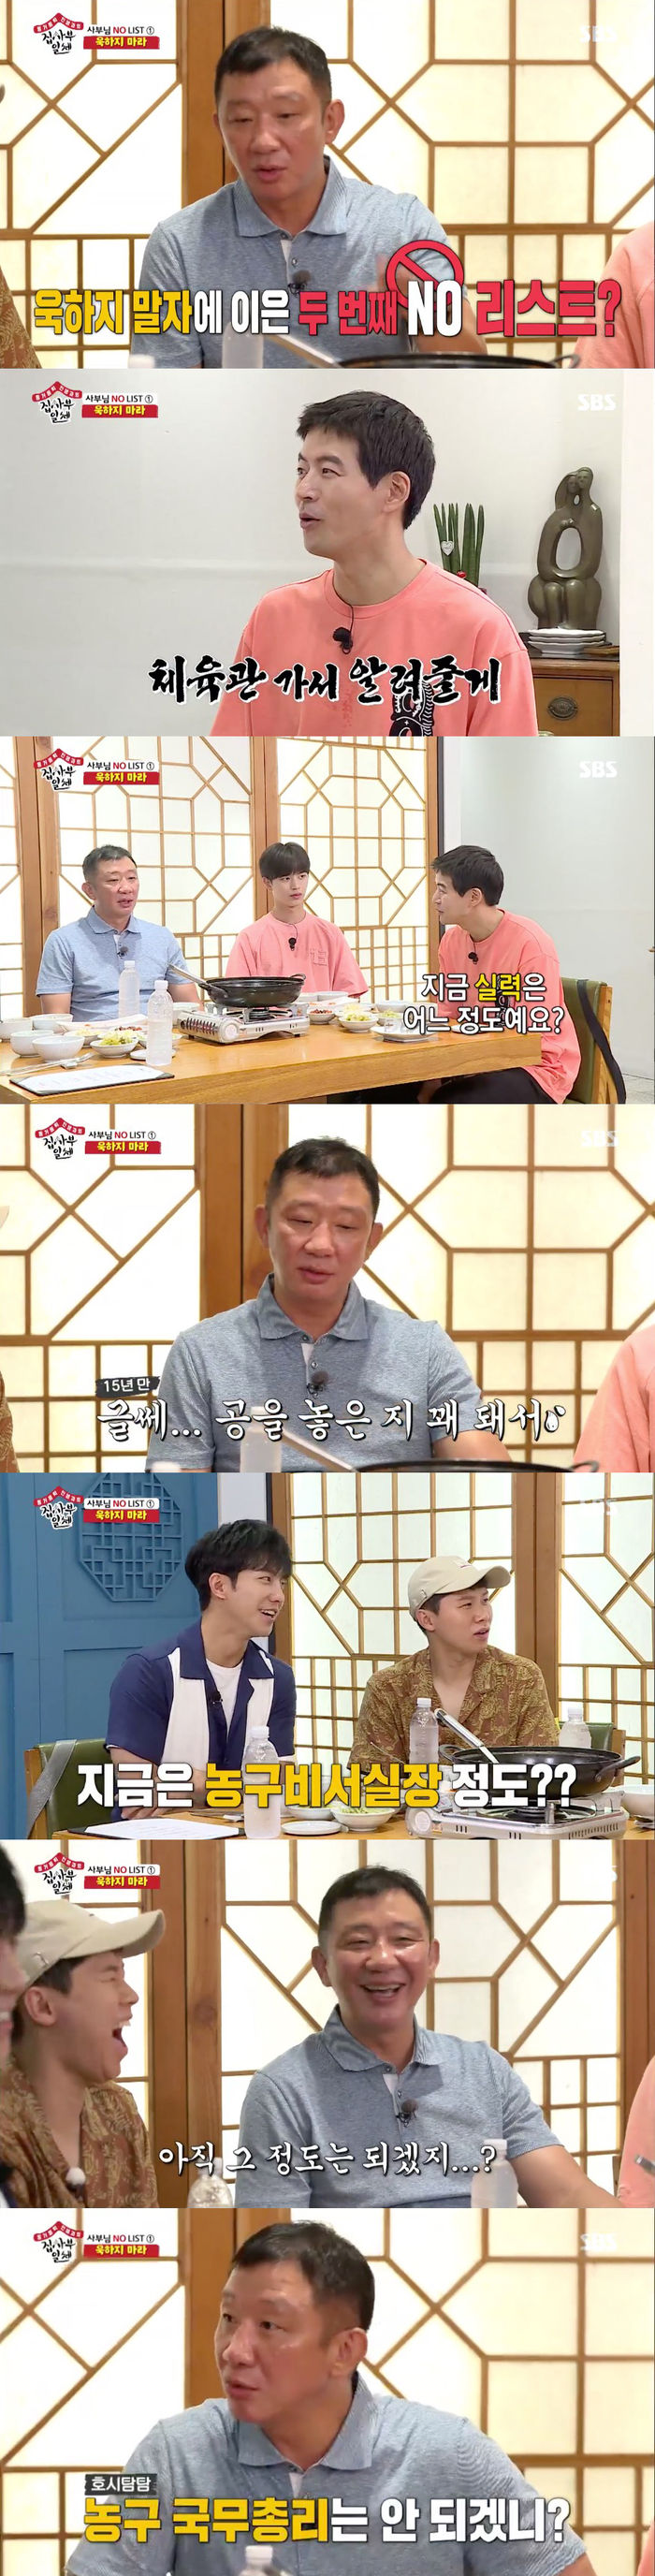 Master Hur Jae spoke about his basketball skills.On SBS All The Butlers broadcast on the 18th, basketball president Hur Jae appeared as master.On the day of the broadcast, Hur Jae told him about the teachings about NO LIST. He first said, I will go to the gym as much as I eat.Lee Sang-yoon, a basketball coach, asked, How much is your recent ability? Then Master Hur Jae replied, It was a basketball president in the past, but not that much.Lee Seung-gi asked, So is it about Chief Secretary? And Master Hur Jae said, What is not about Chief Secretary?Lee Sang-yoon admired Oh, thats really great.Then Master Hur Jae said, No, is not it a basketball prime minister?, and Lee Seung-gi laughed, saying coolly, Ay, I do not think thats it.